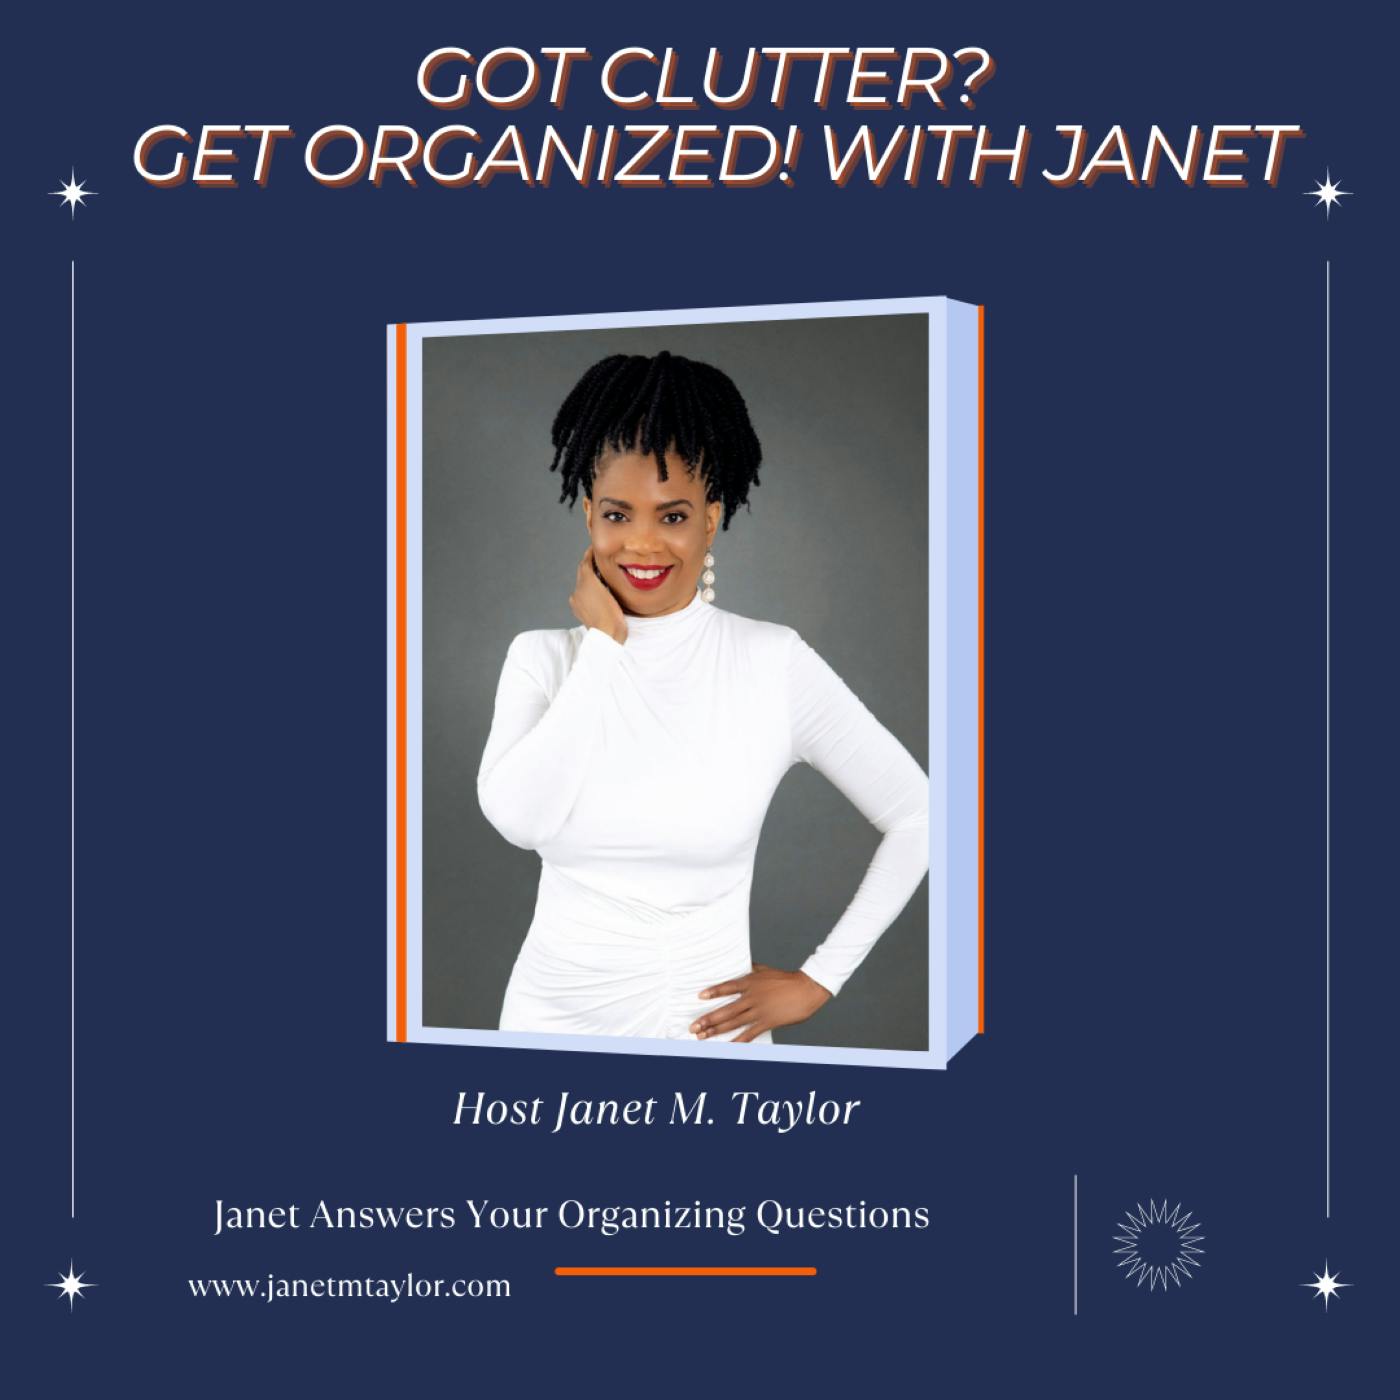 Janet Answers Your Organizing Questions